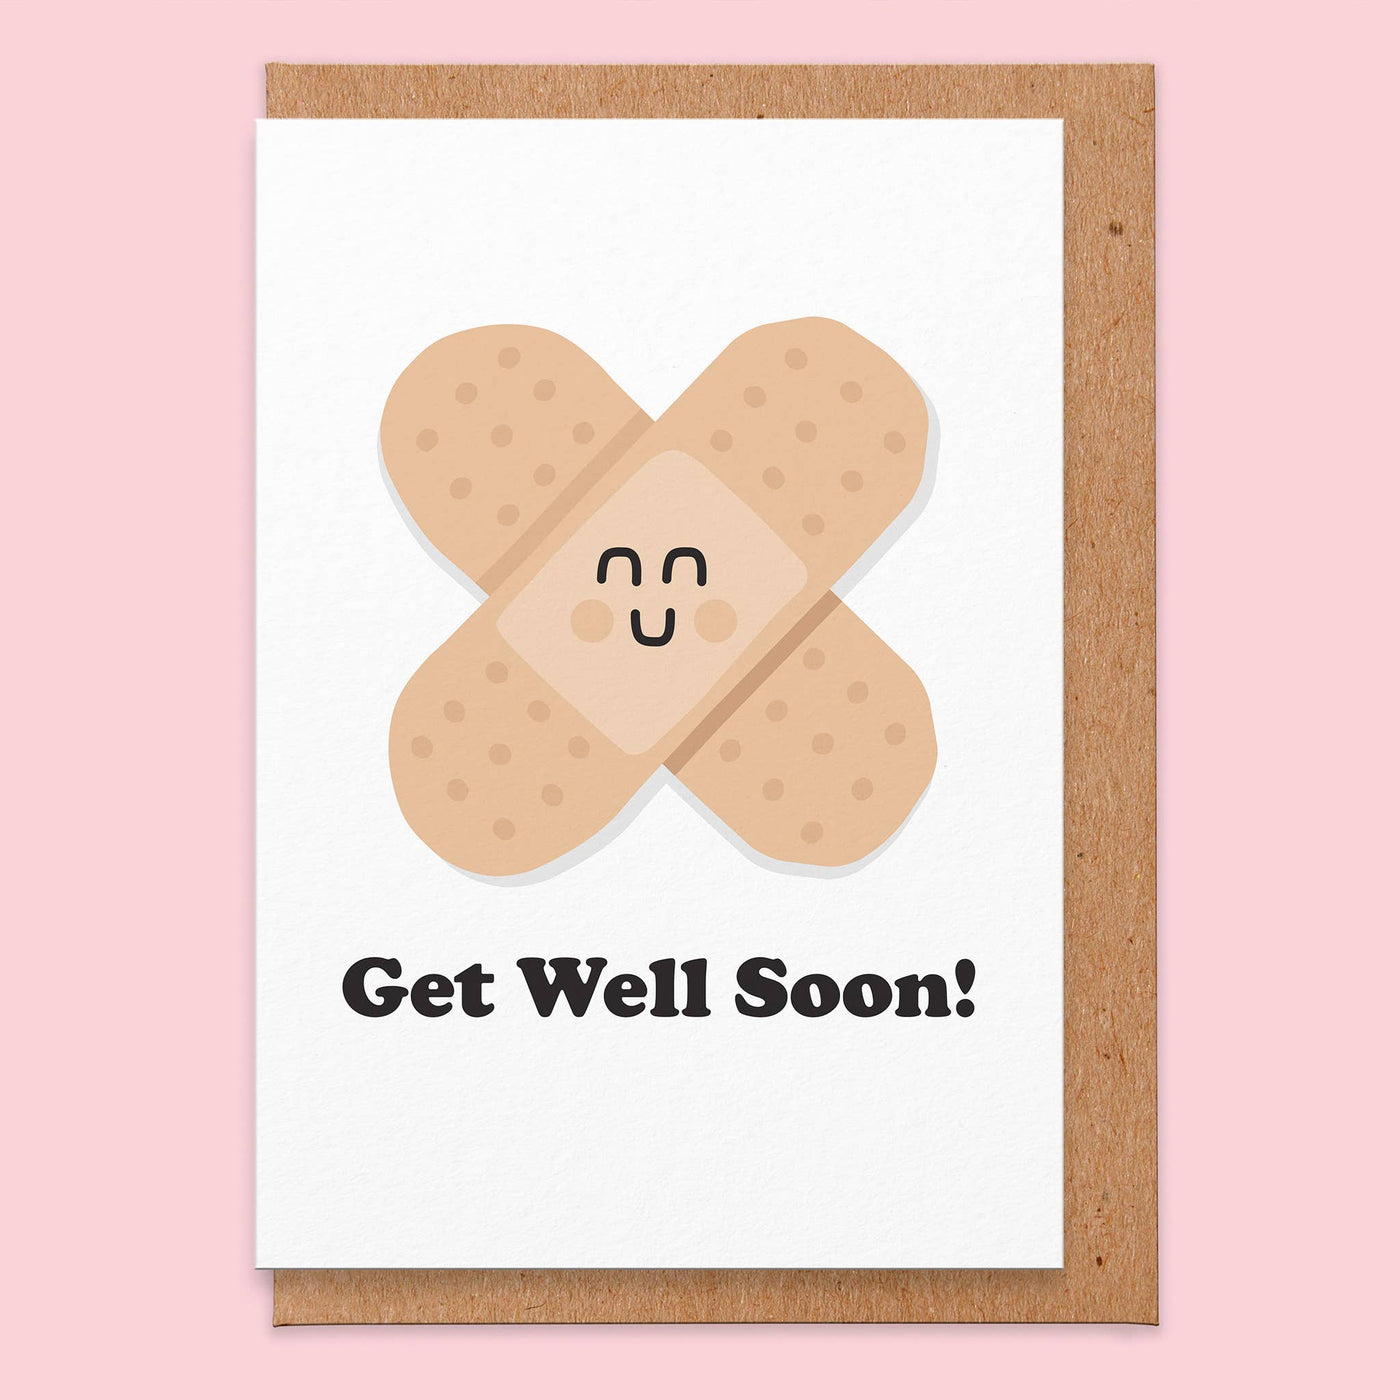 Sticky Plaster Get Well Soon Card